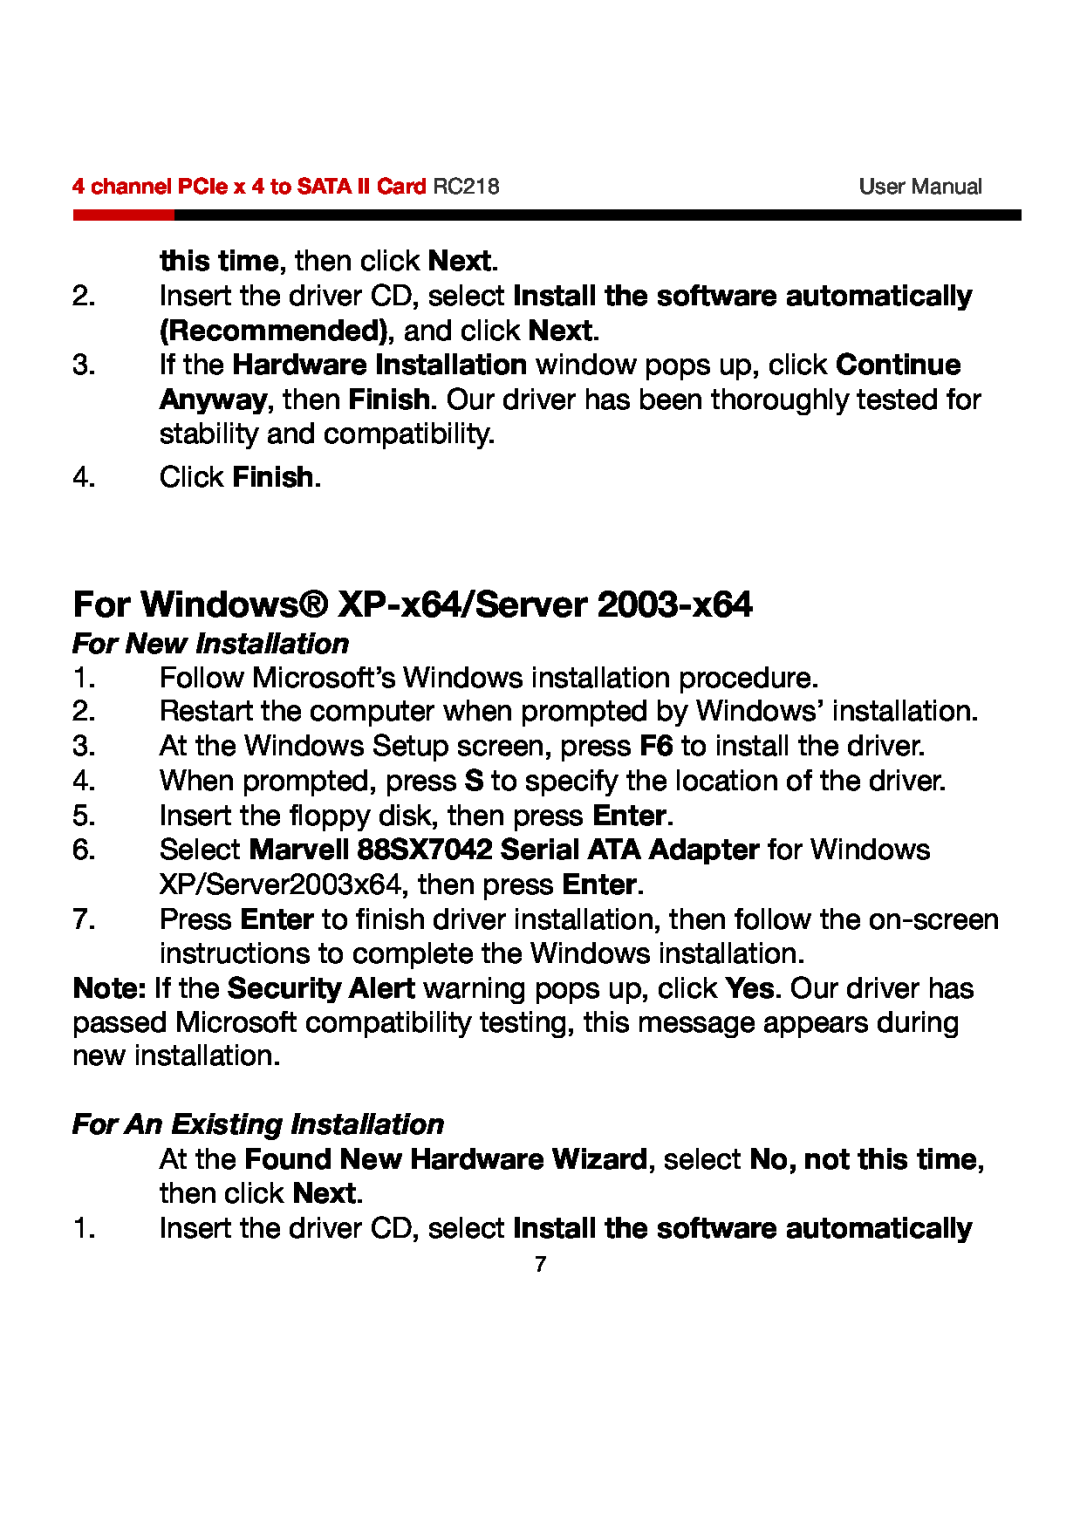 Rosewill RC218 user manual For Windows XP-x64/Server, For New Installation, For An Existing Installation 